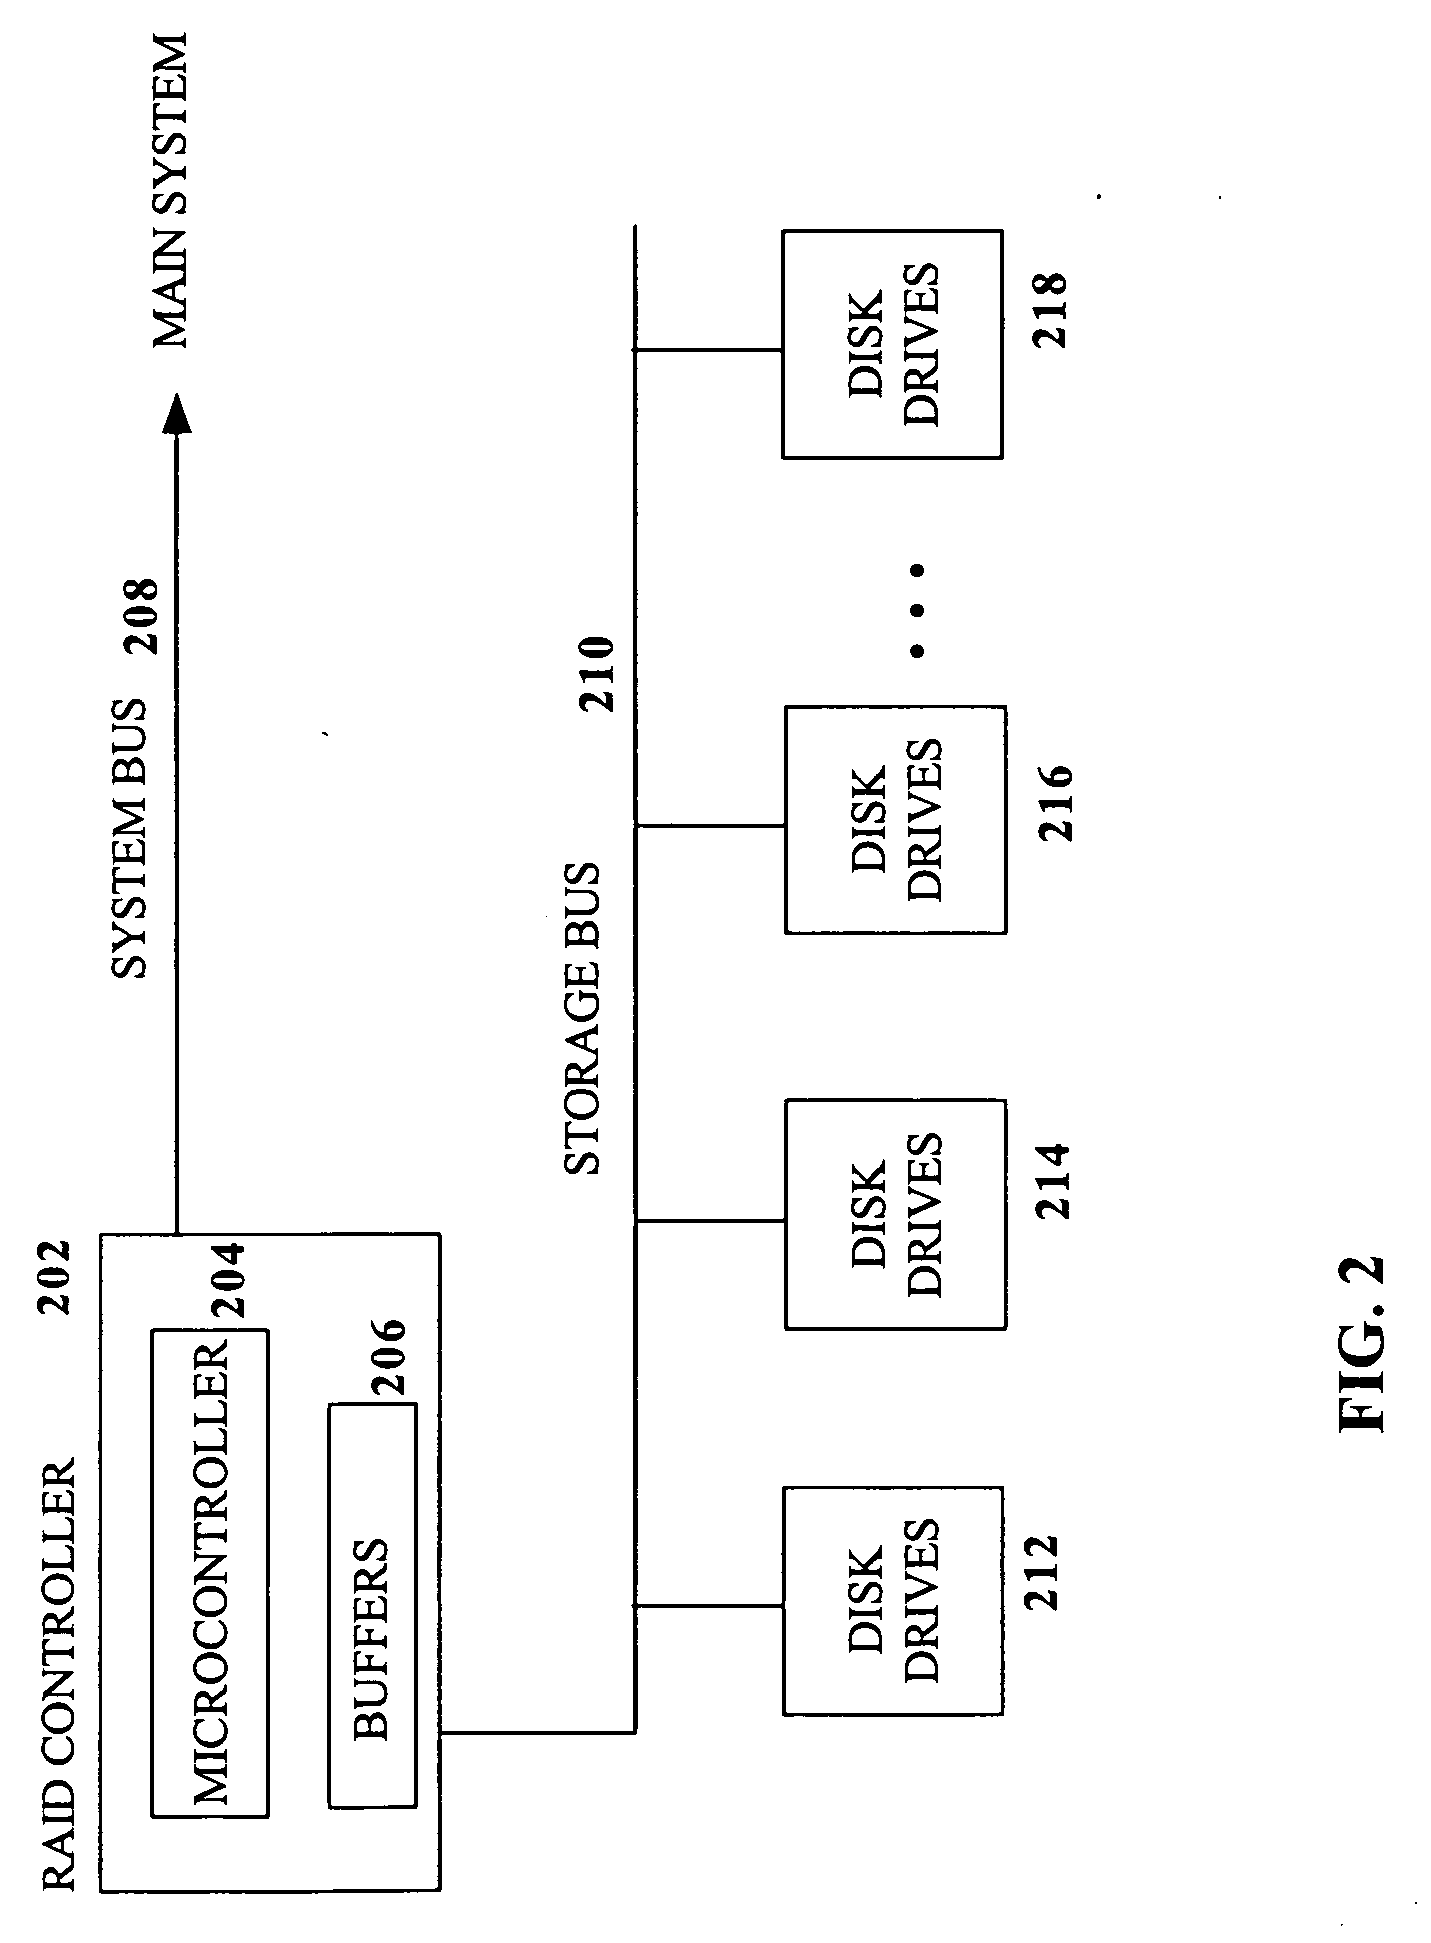 Method and system for increasing parallelism of disk accesses when restoring data in a disk array system